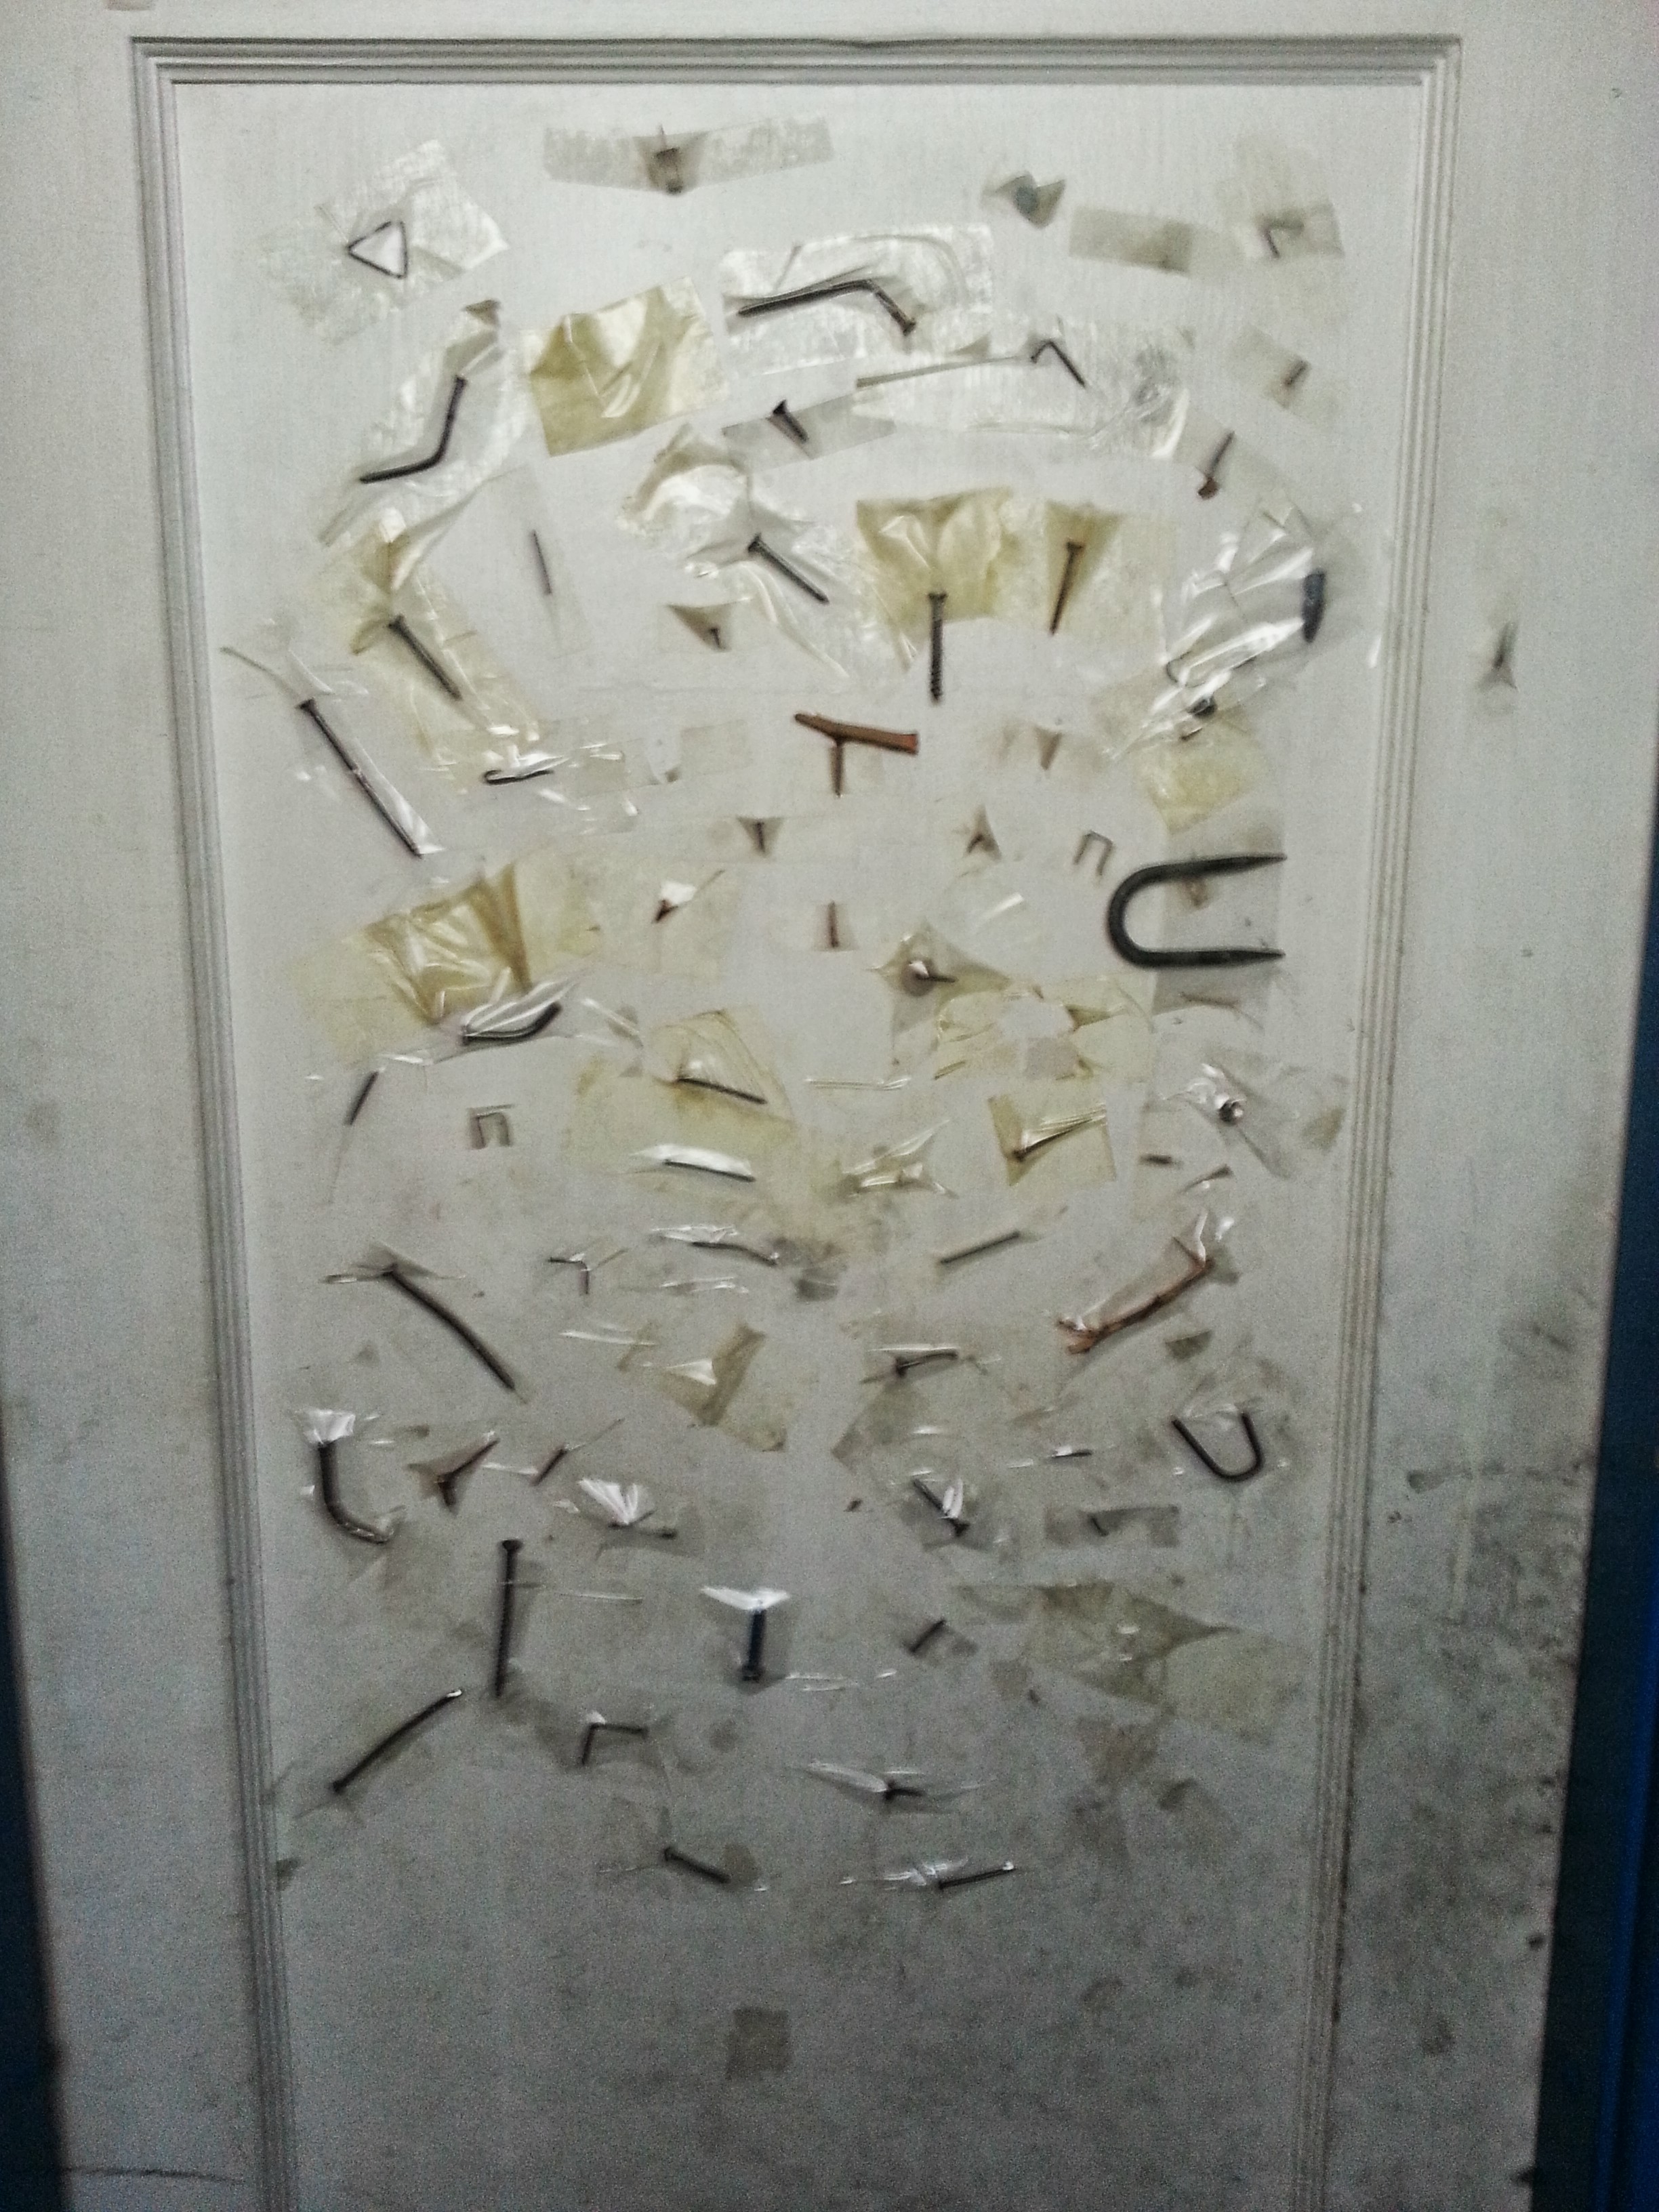 a bike mechanic shop's bathroom door decorated with nails and other things that have punctured bike tires.